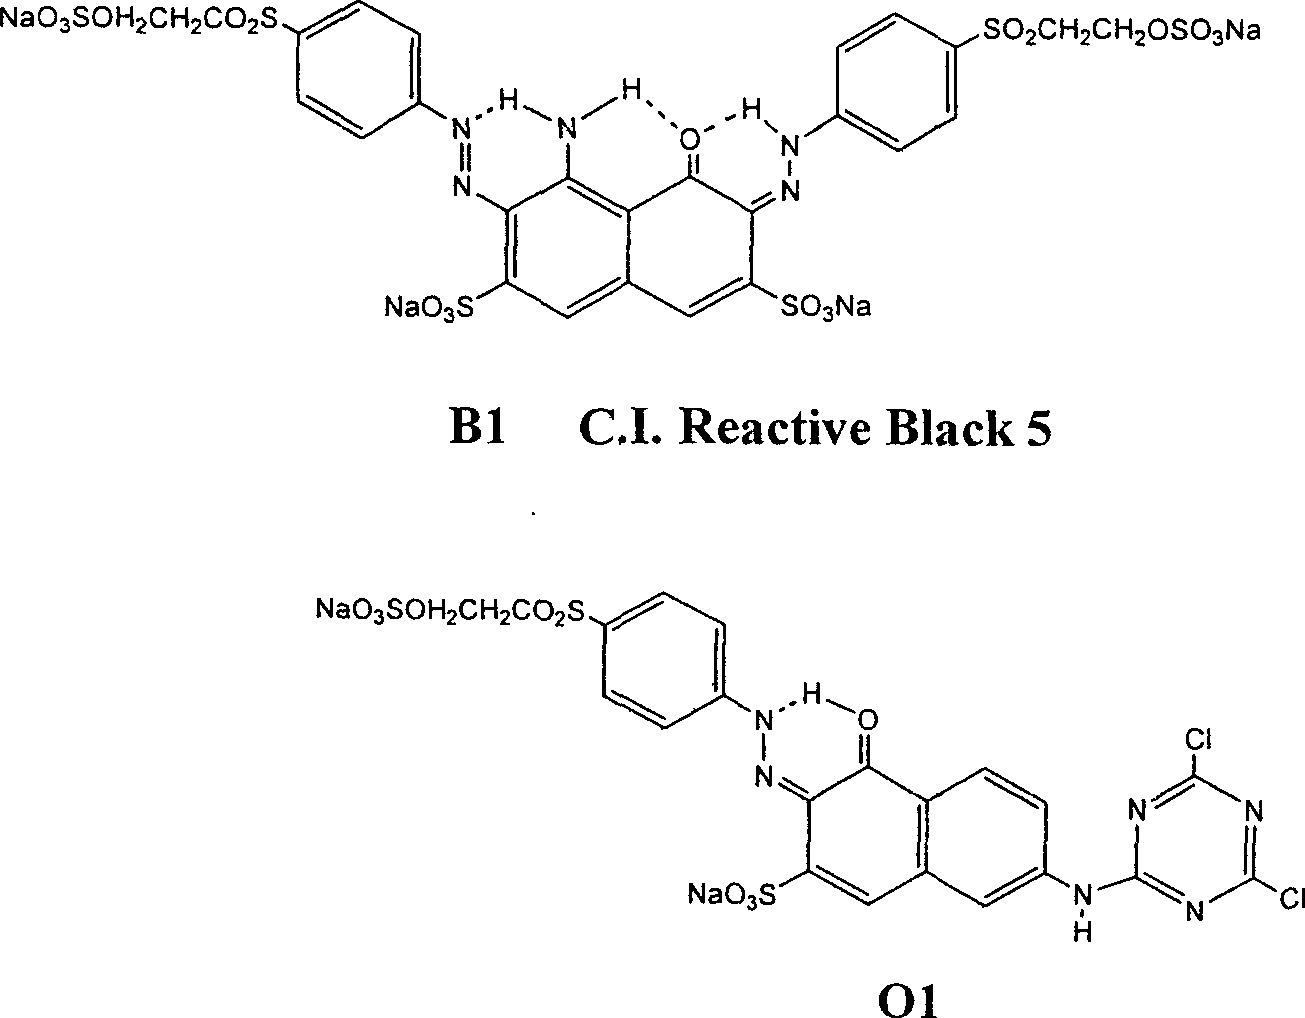 Black and active dye